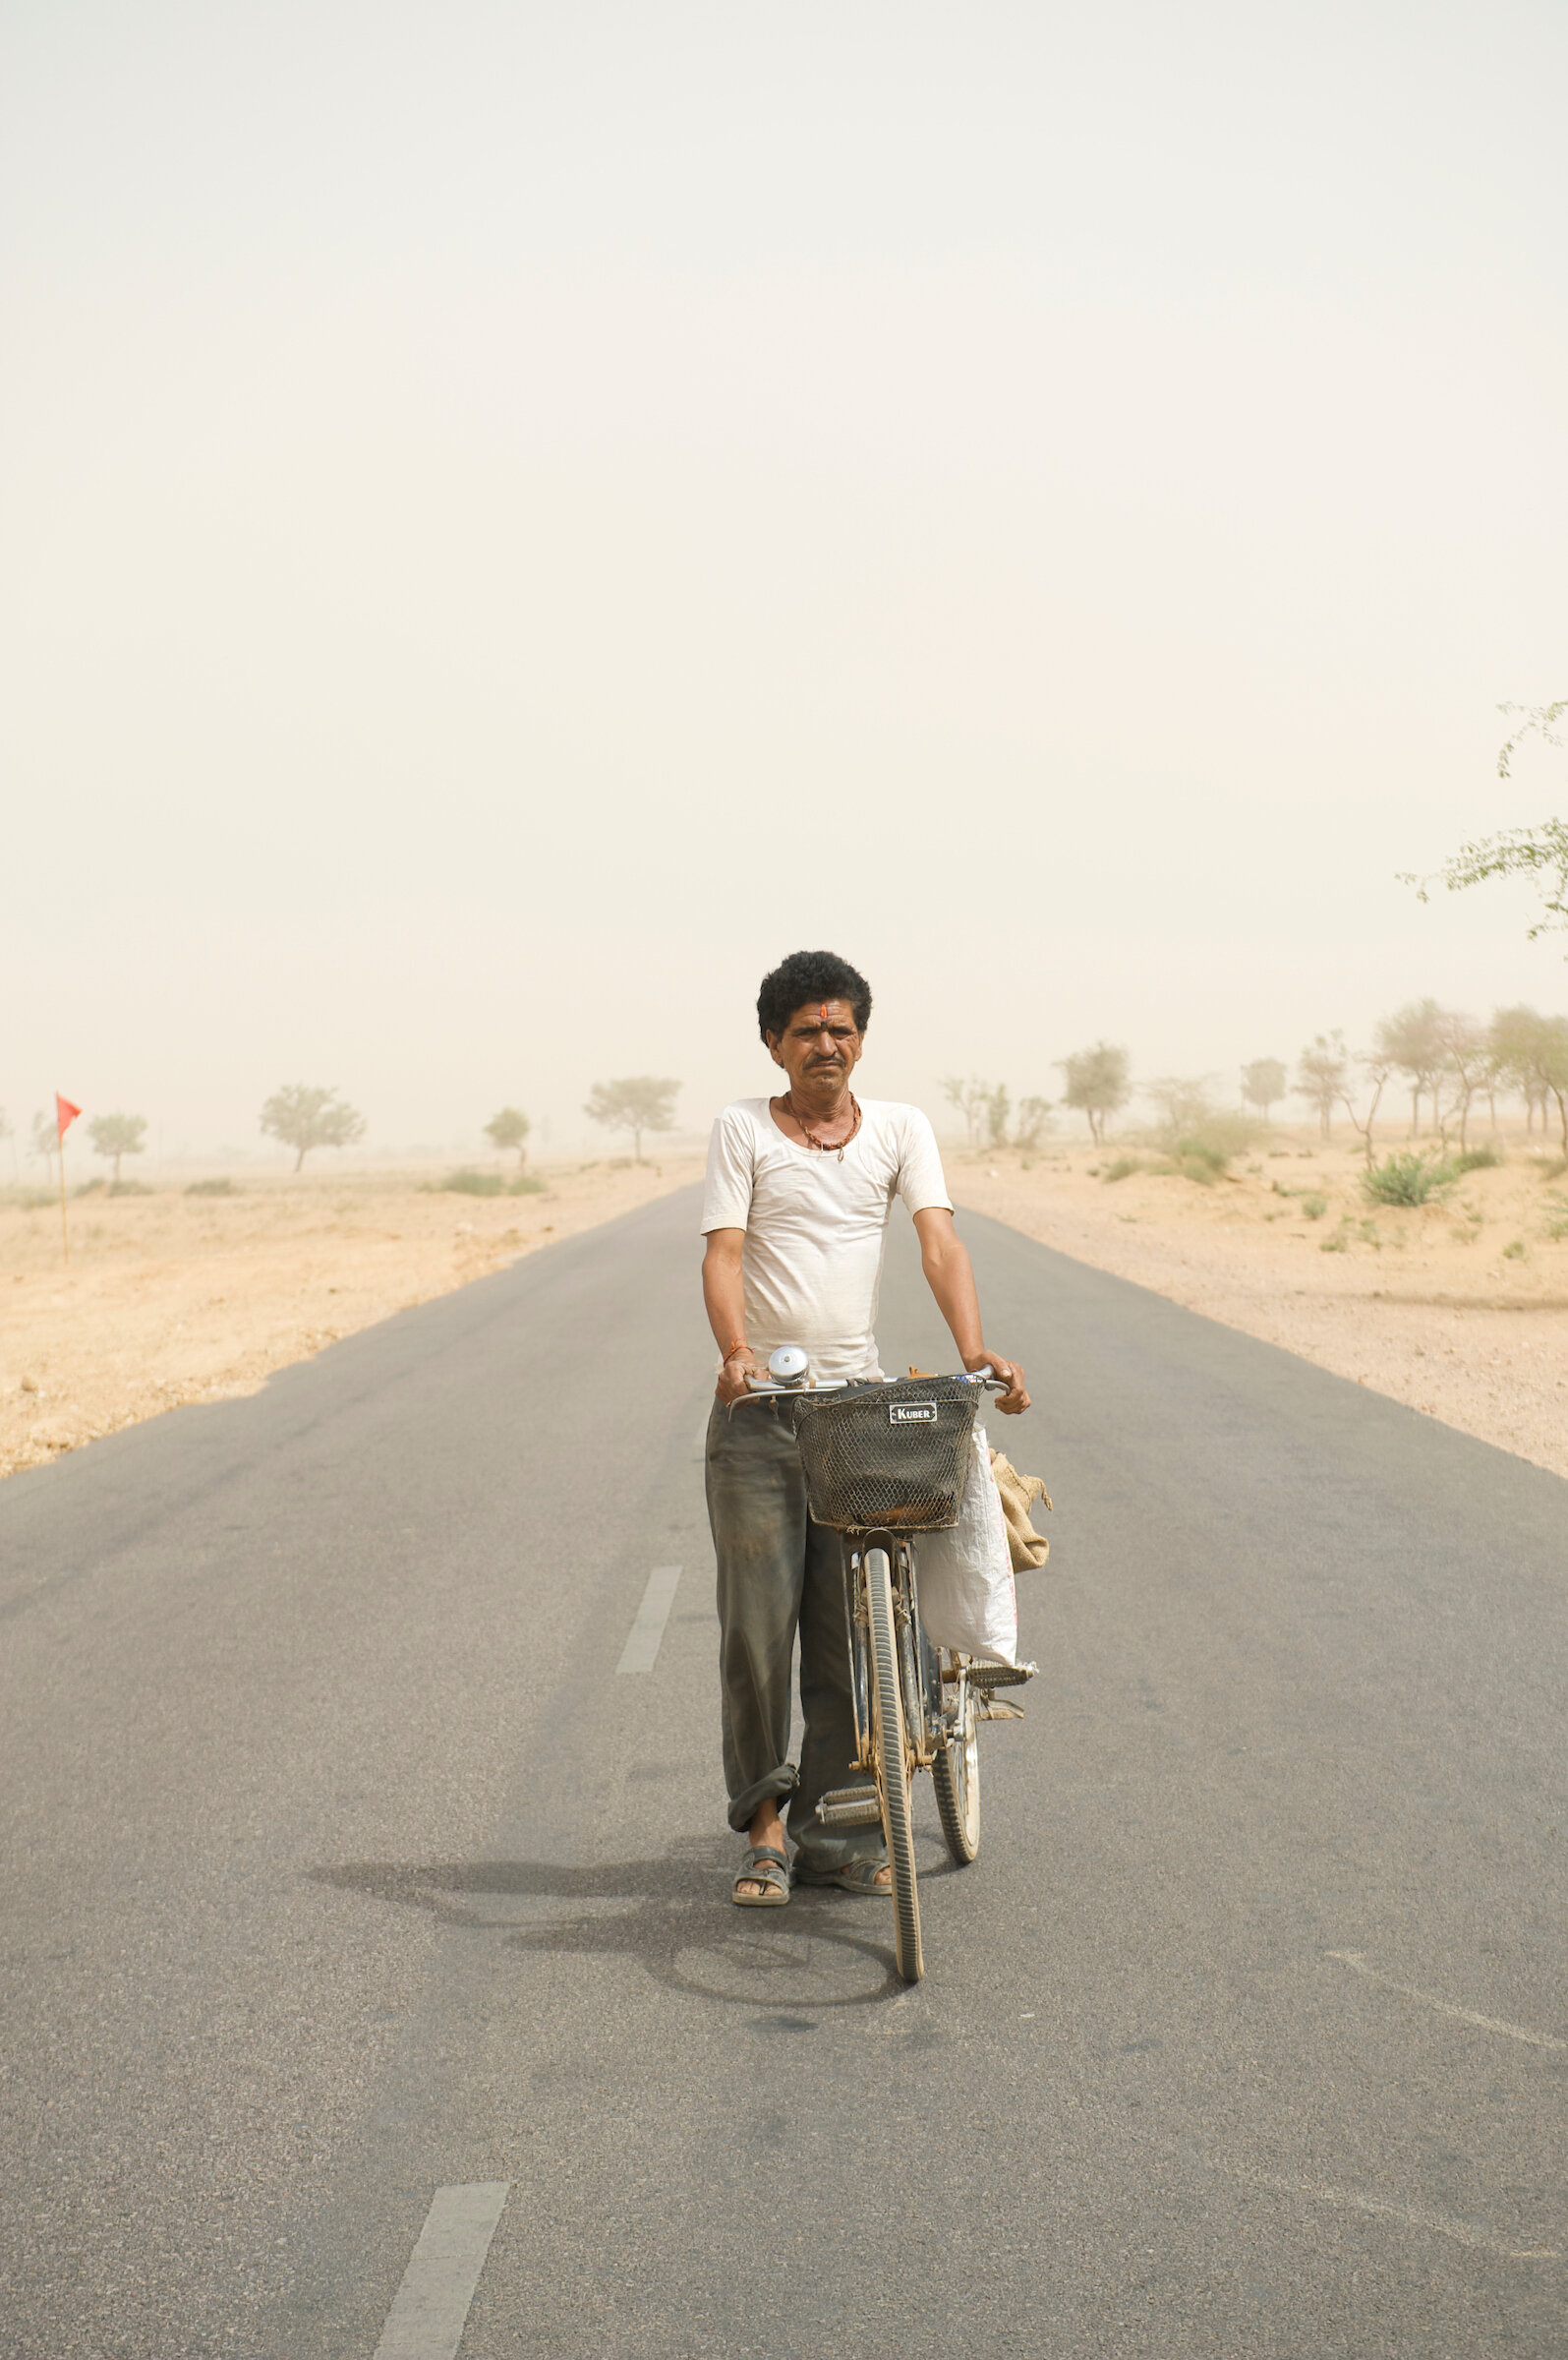  Day laborer commuting in a sandstorm - Rajasthan, India 